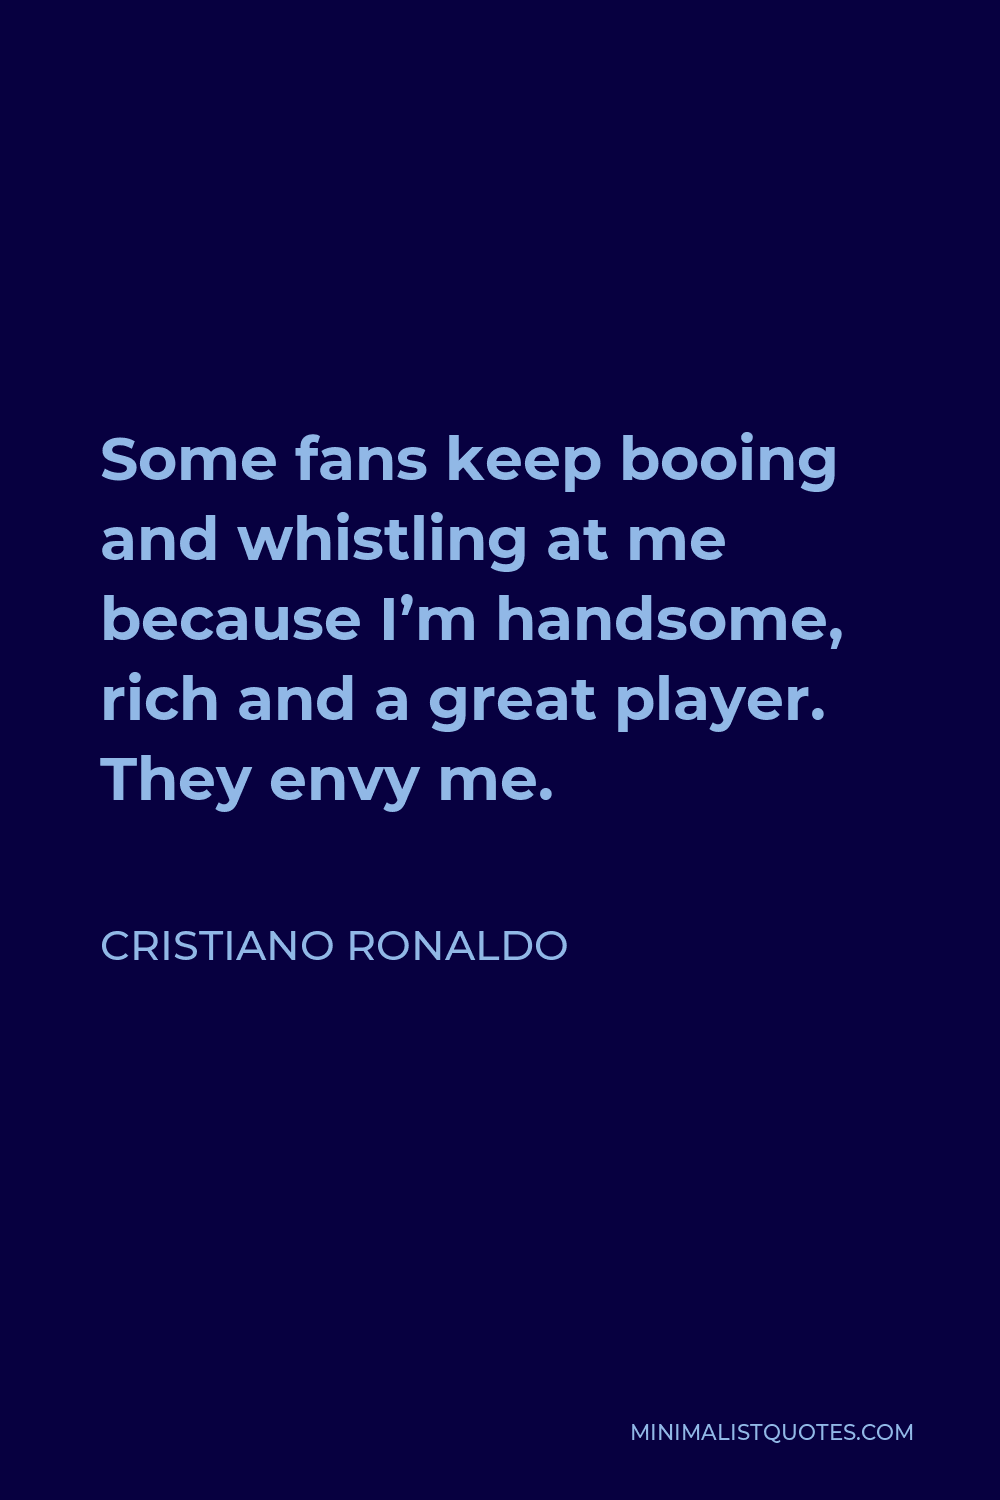 Cristiano Ronaldo Quote - Some fans keep booing and whistling at me because I’m handsome, rich and a great player. They envy me.